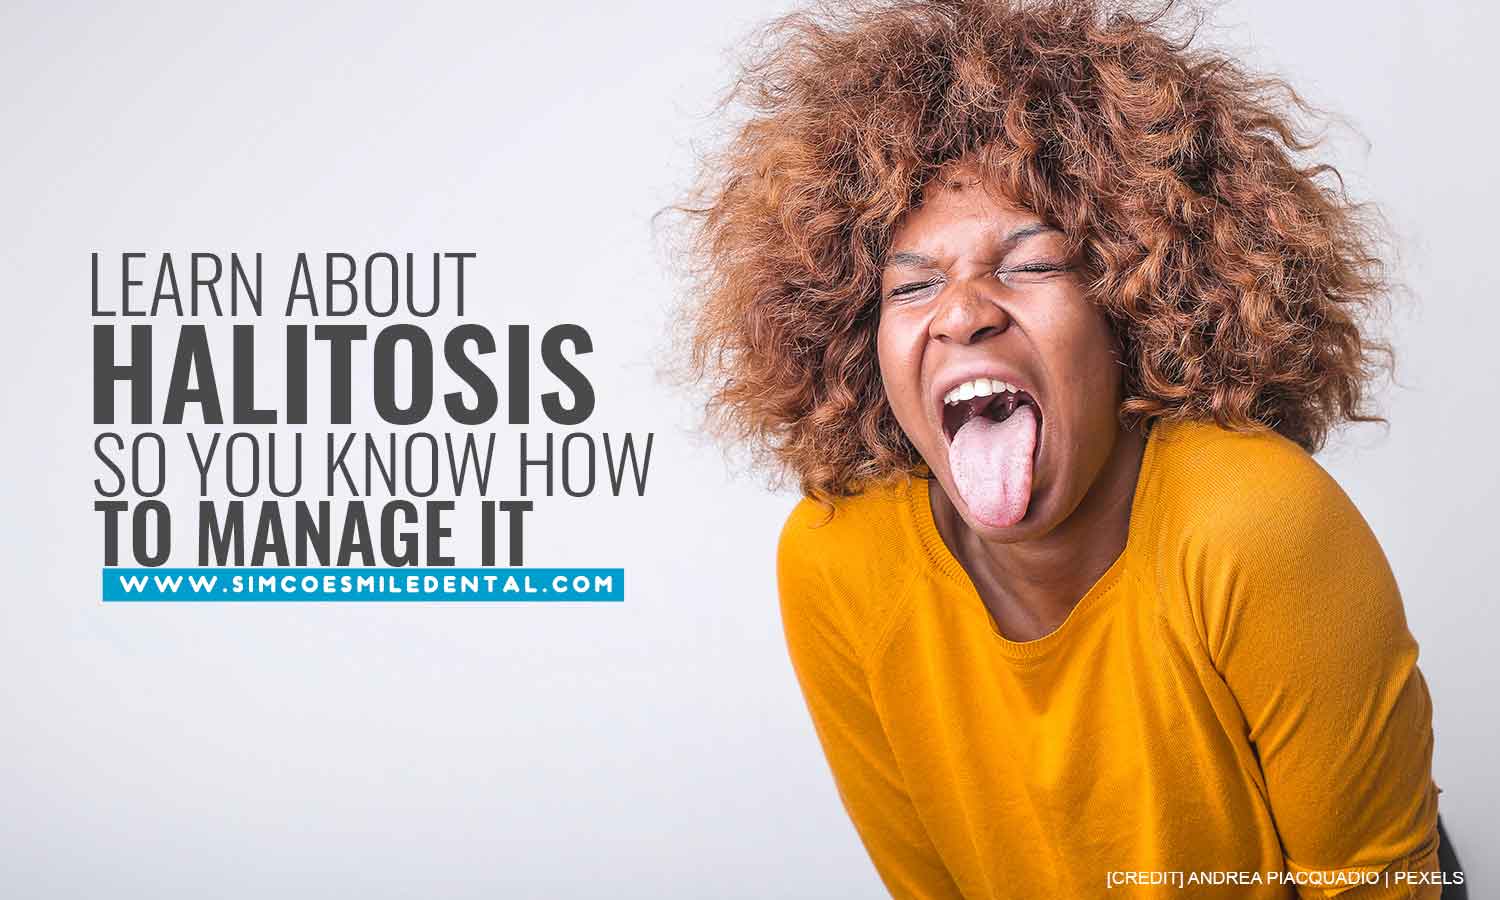 Learn-about-halitosis-so-you-know-how-to-manage-it Halitosis and Your Oral Health